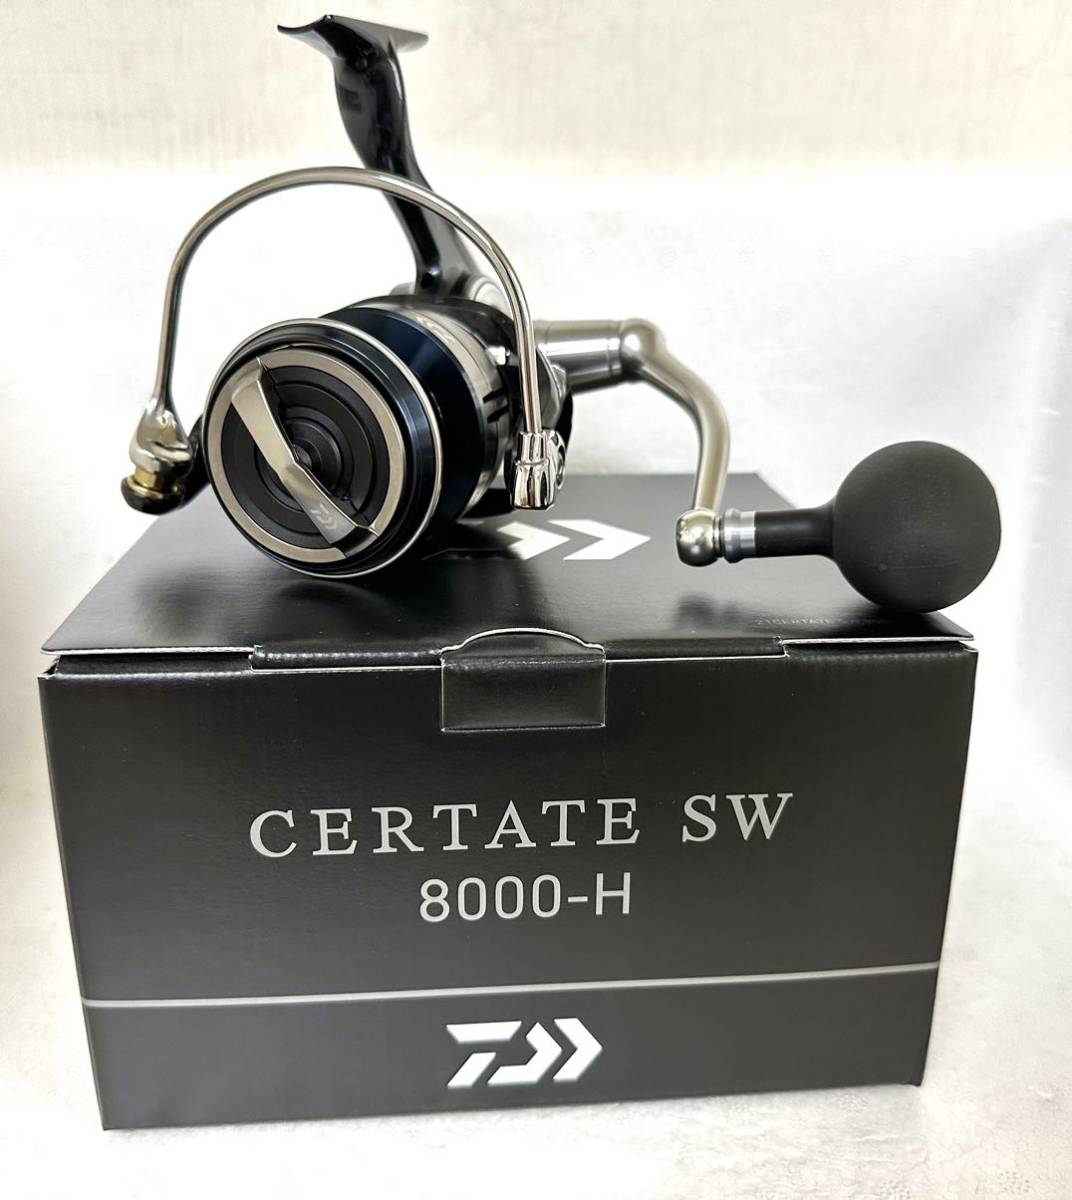 new goods ] Daiwa DAIWA CERTATE SW cell te-toSW 8000-H: Real Yahoo auction  salling